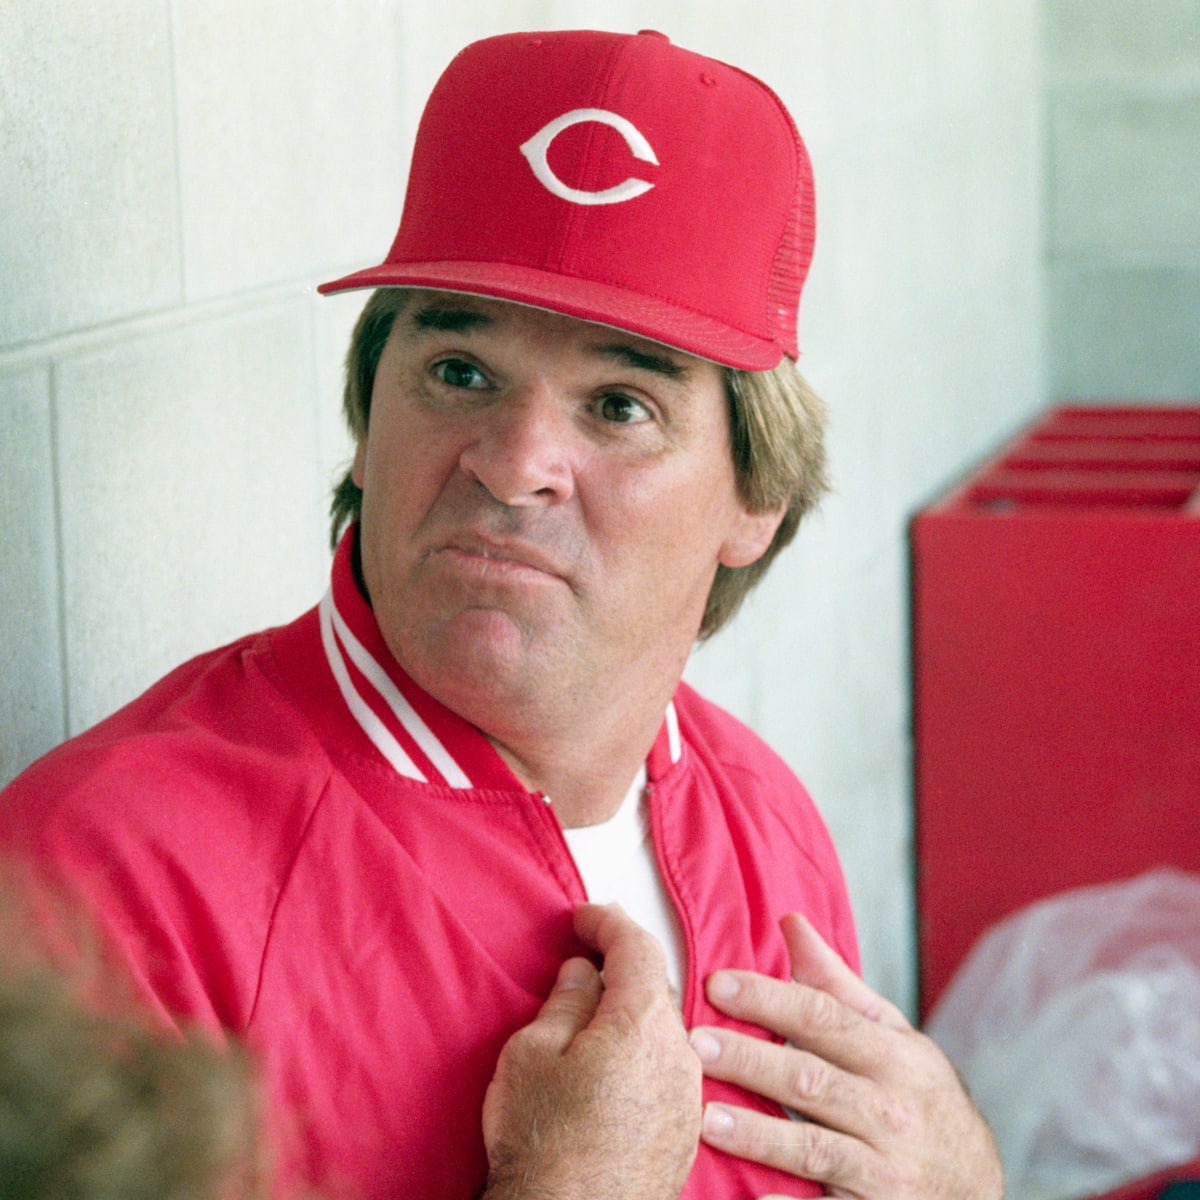 Phillies offer weak response after inviting Pete Rose back to the